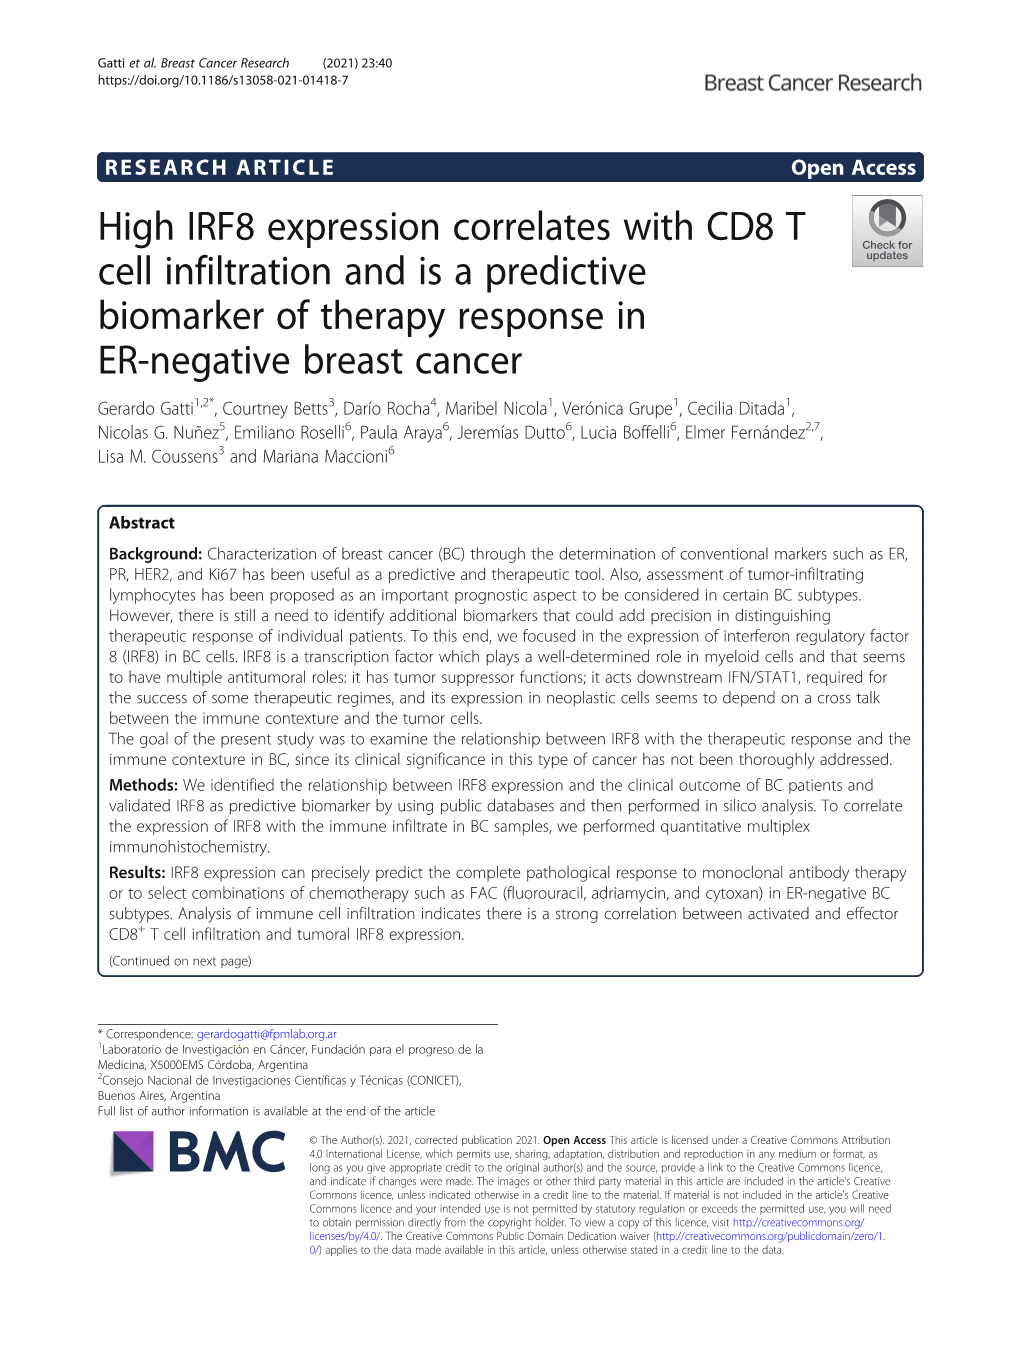 High IRF8 Expression Correlates with CD8 T Cell Infiltration and Is A